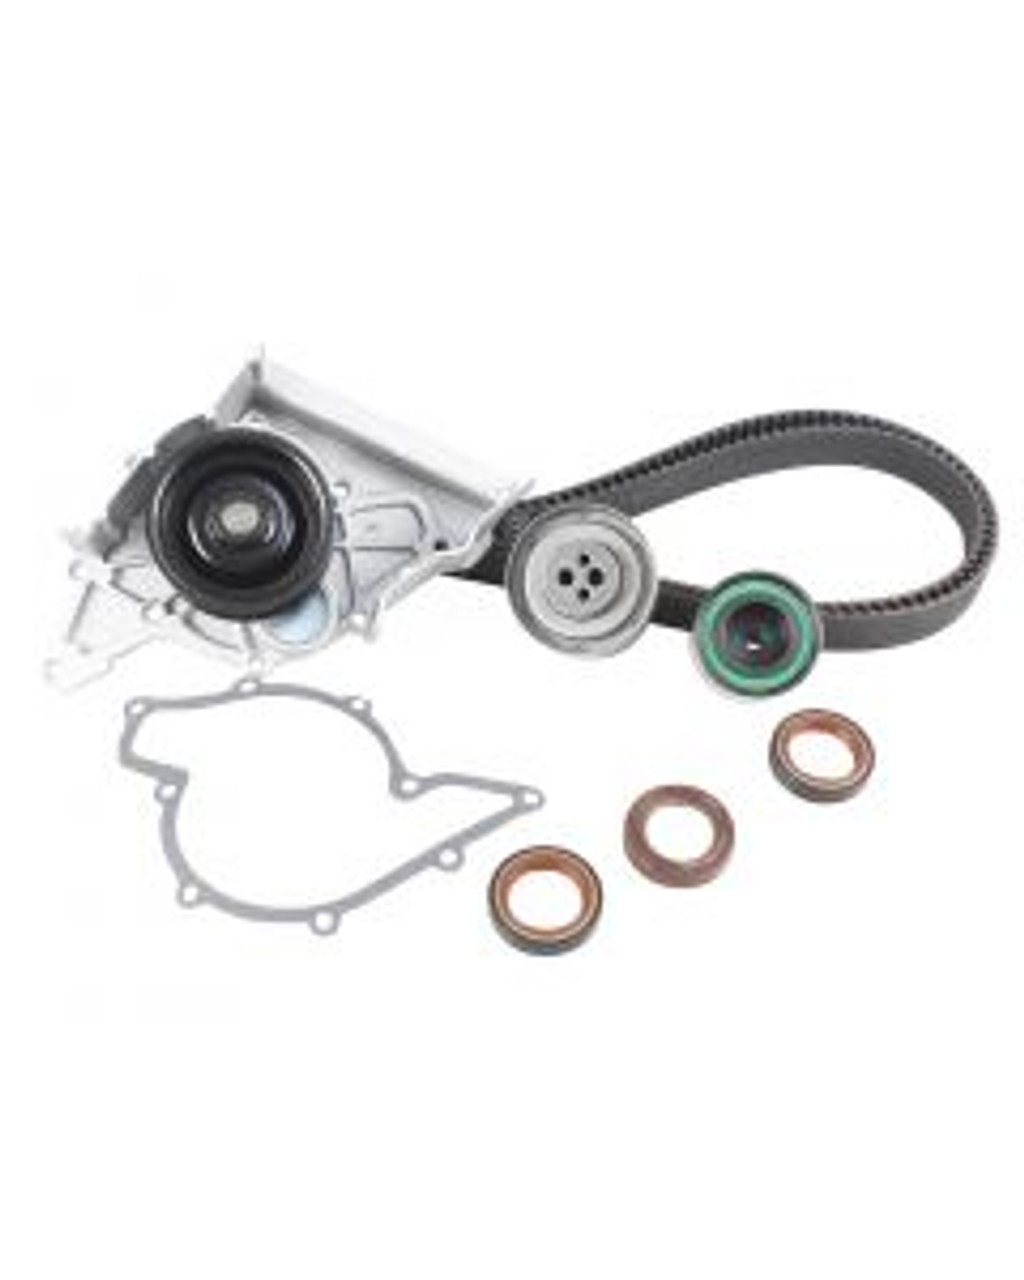 Timing Belt Kit with Water Pump 2.8L 1994 Audi 100 - TBK806WP.6